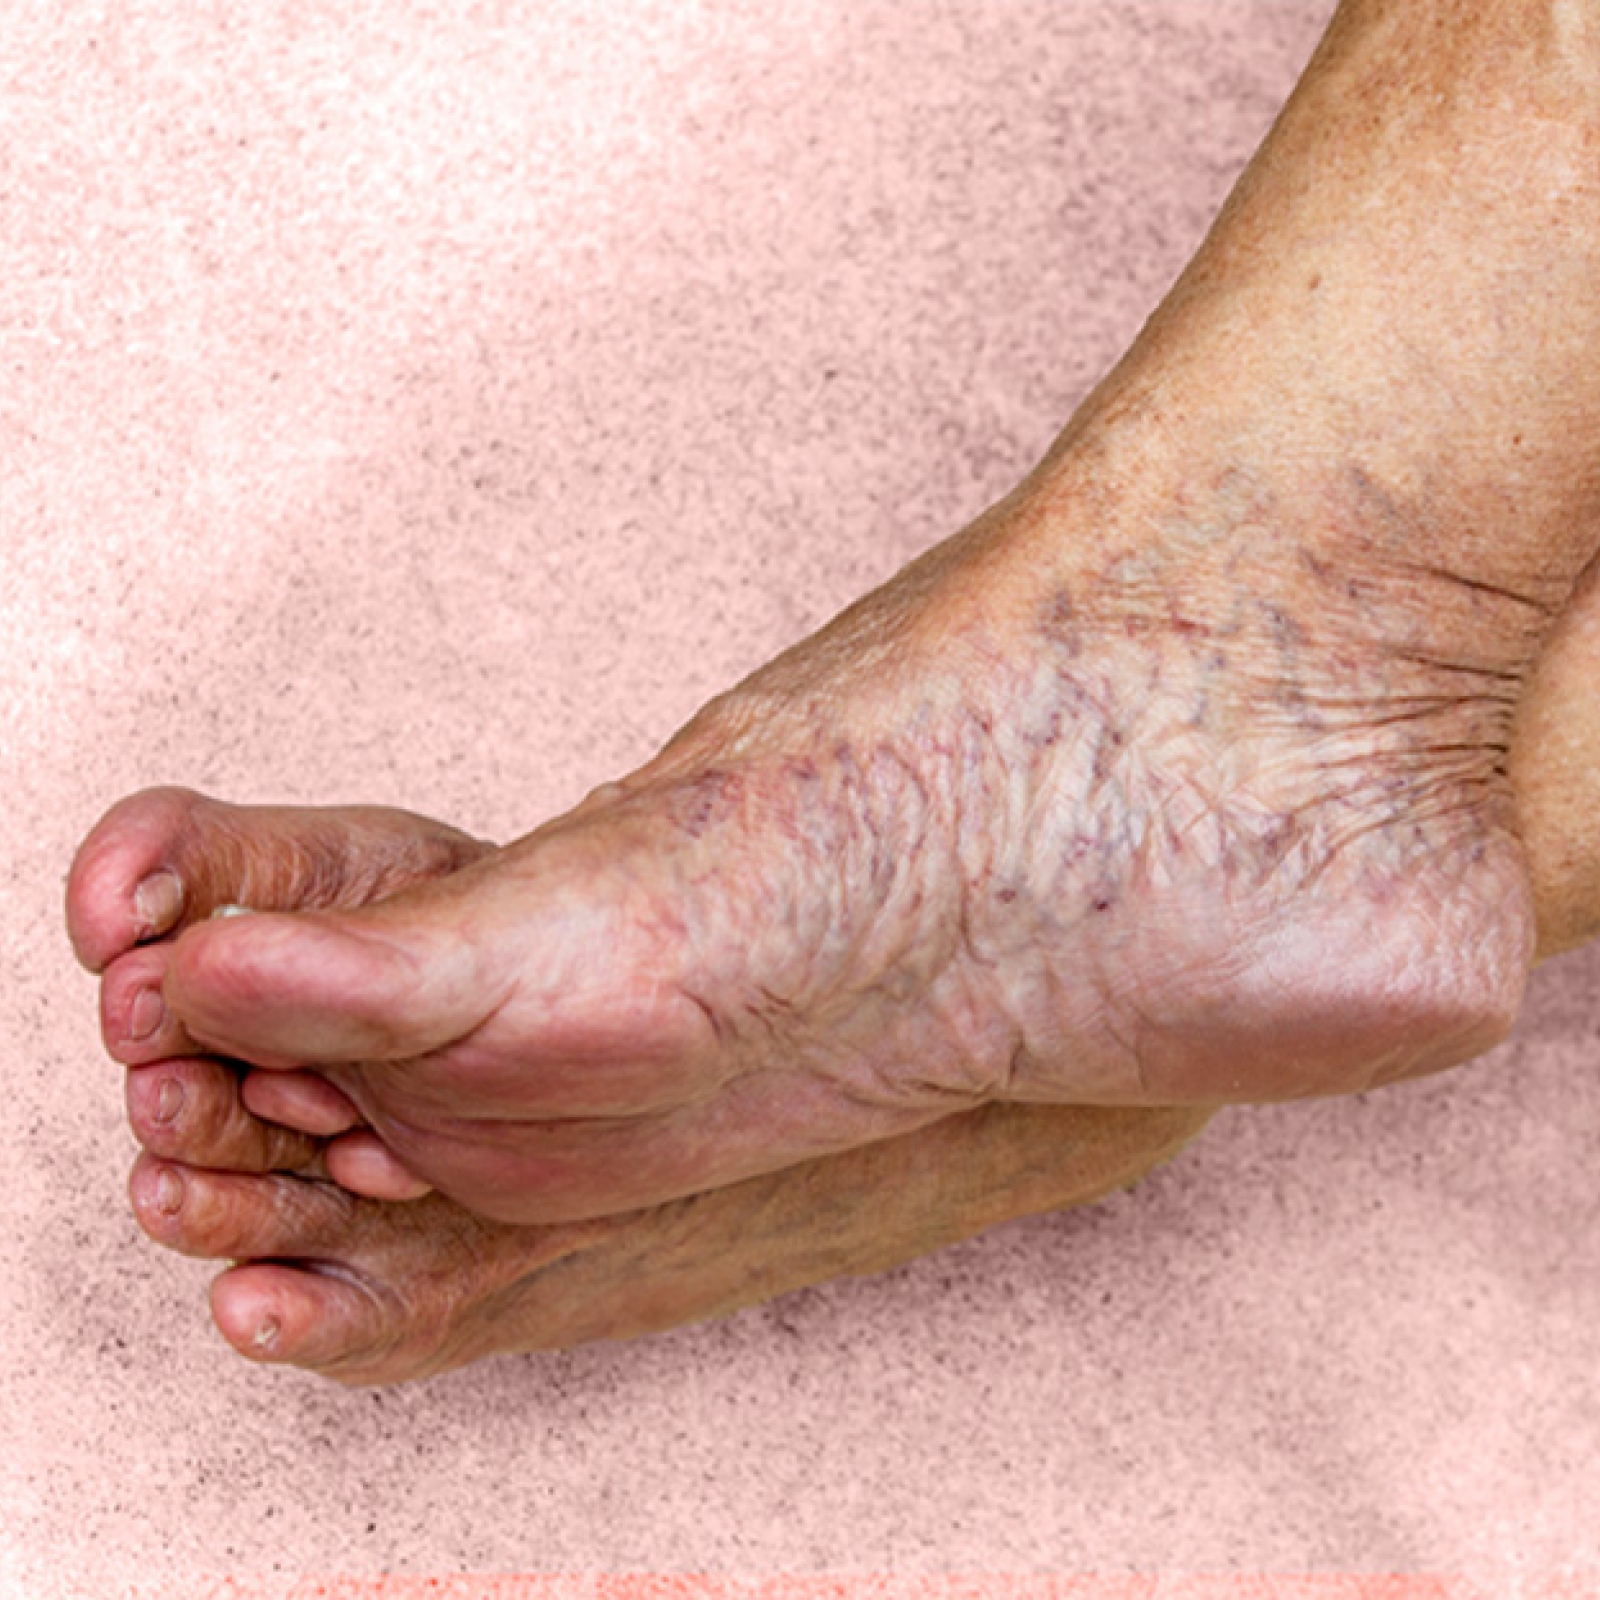 Treat varicose veins at home | Phlebologist's advice AngioLife